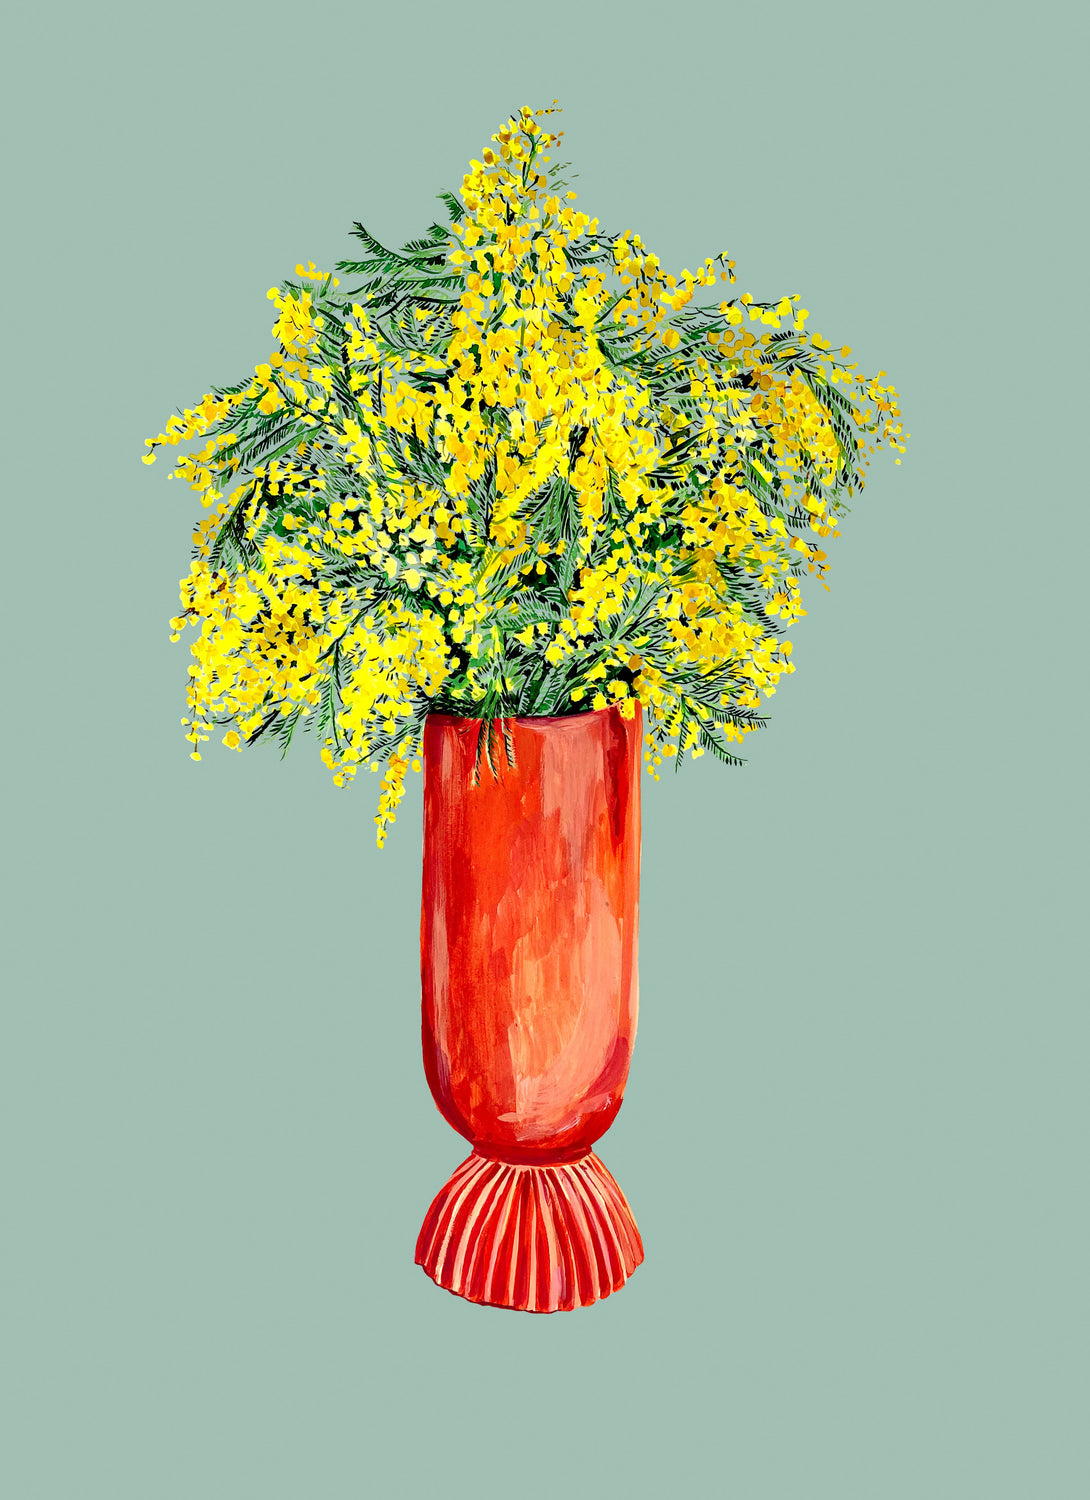 Mimosa in Coral Vase Giclée Print